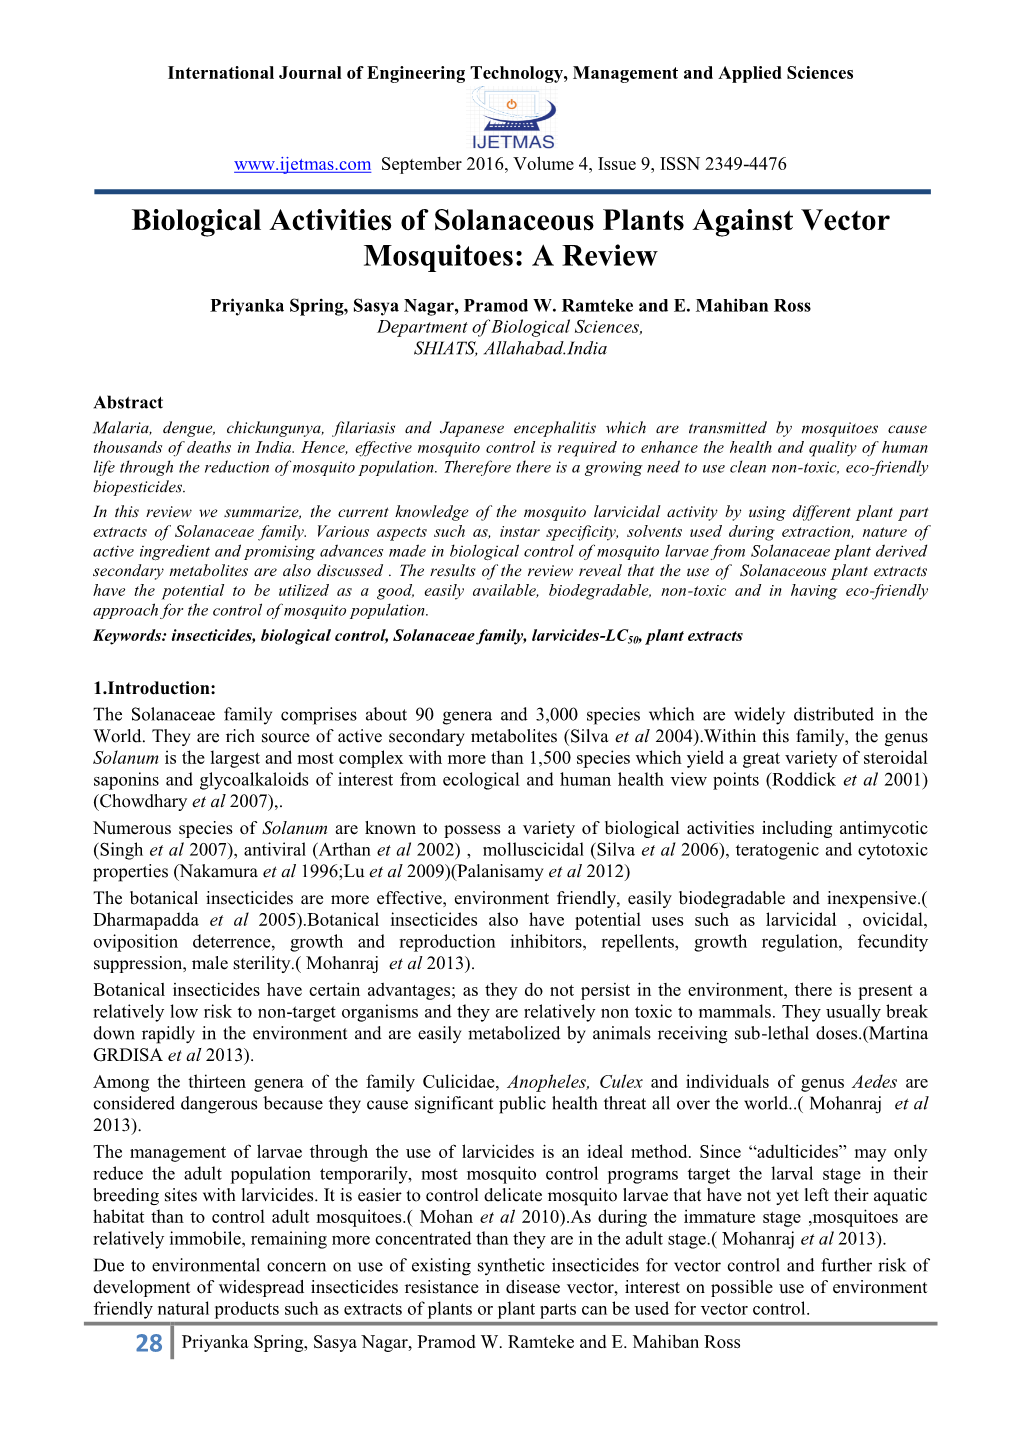 Biological Activities of Solanaceous Plants Against Vector Mosquitoes: a Review